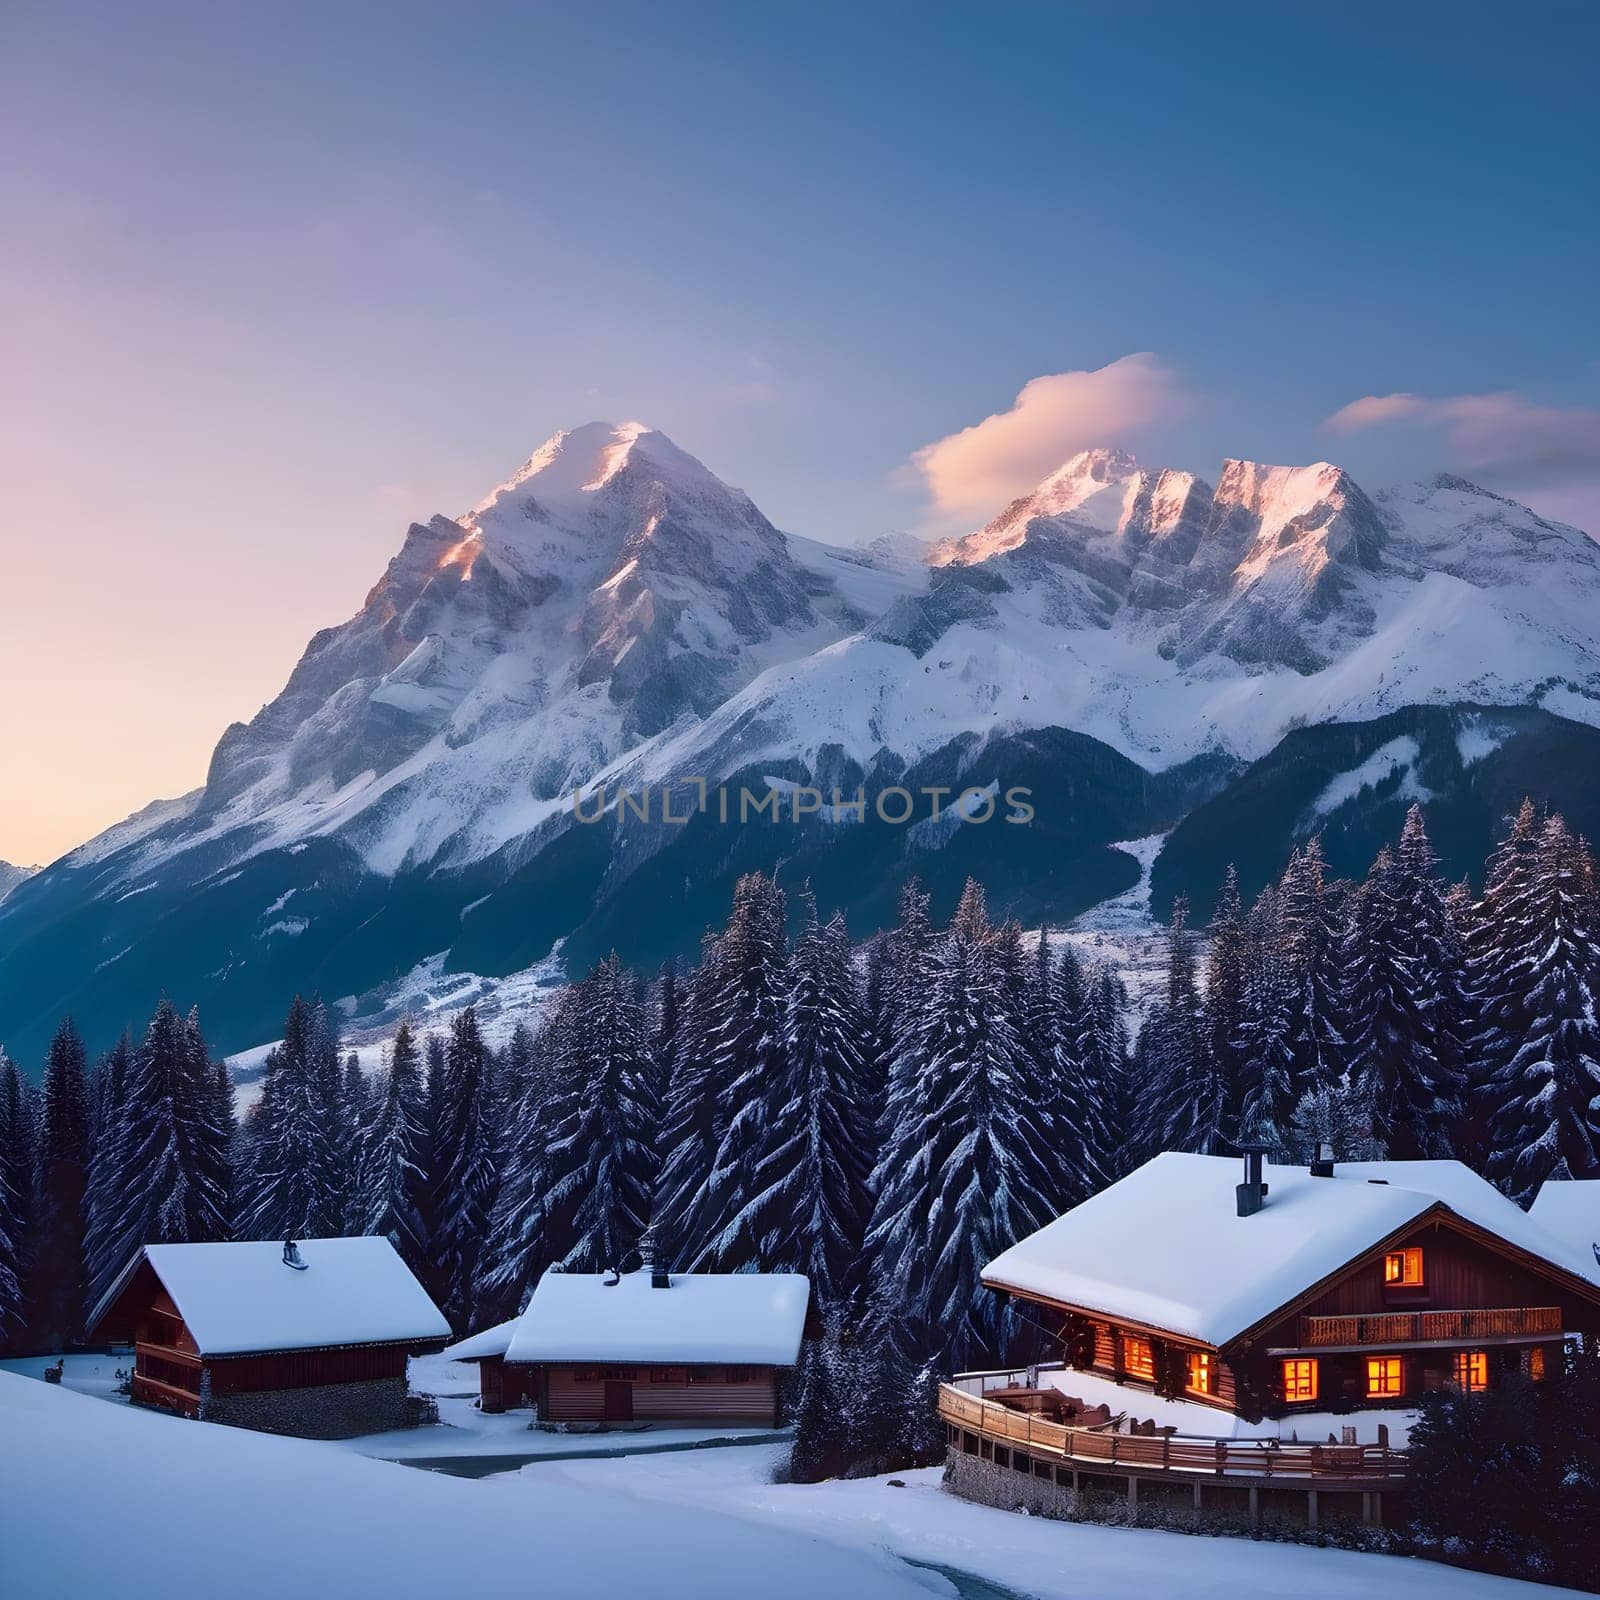 Golden Tranquility: Sunset Panorama of the Snow-Capped Alps